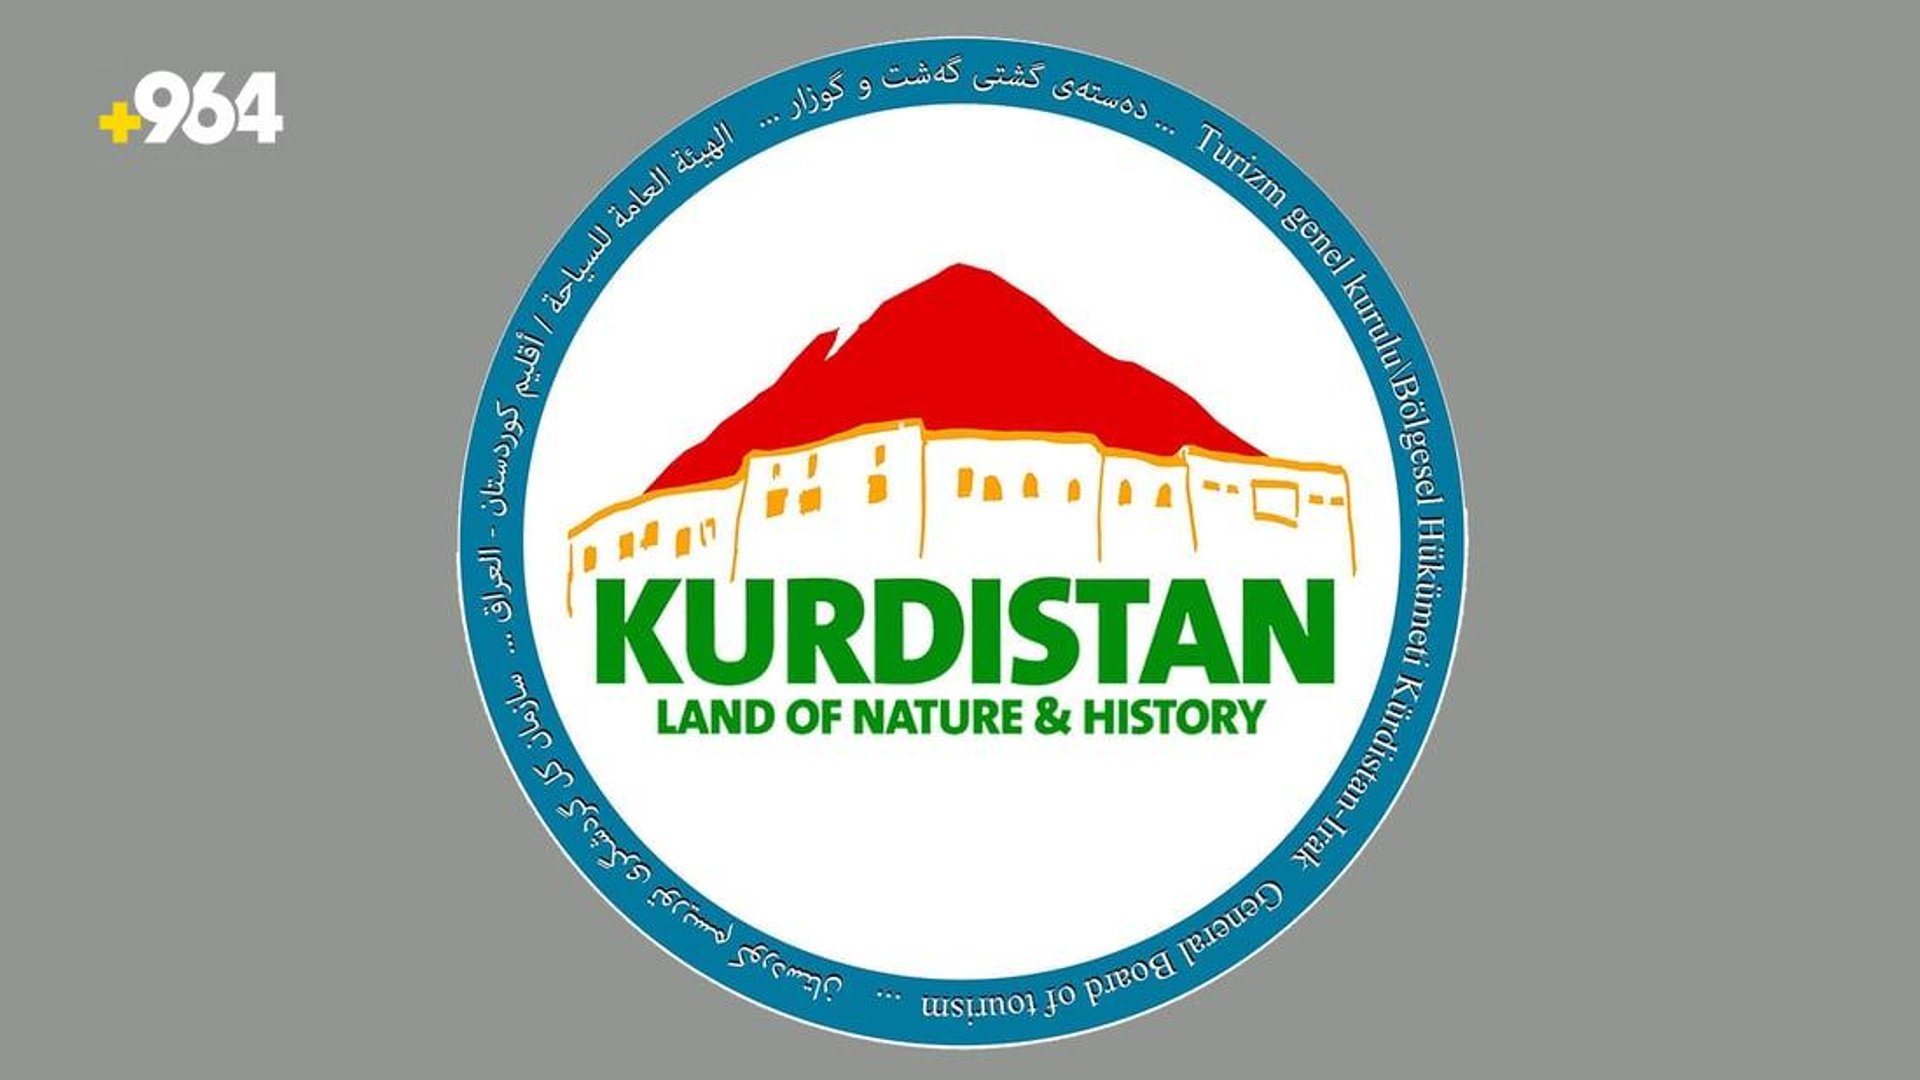 Kurdish authorities gear up for a busy holiday tourism season